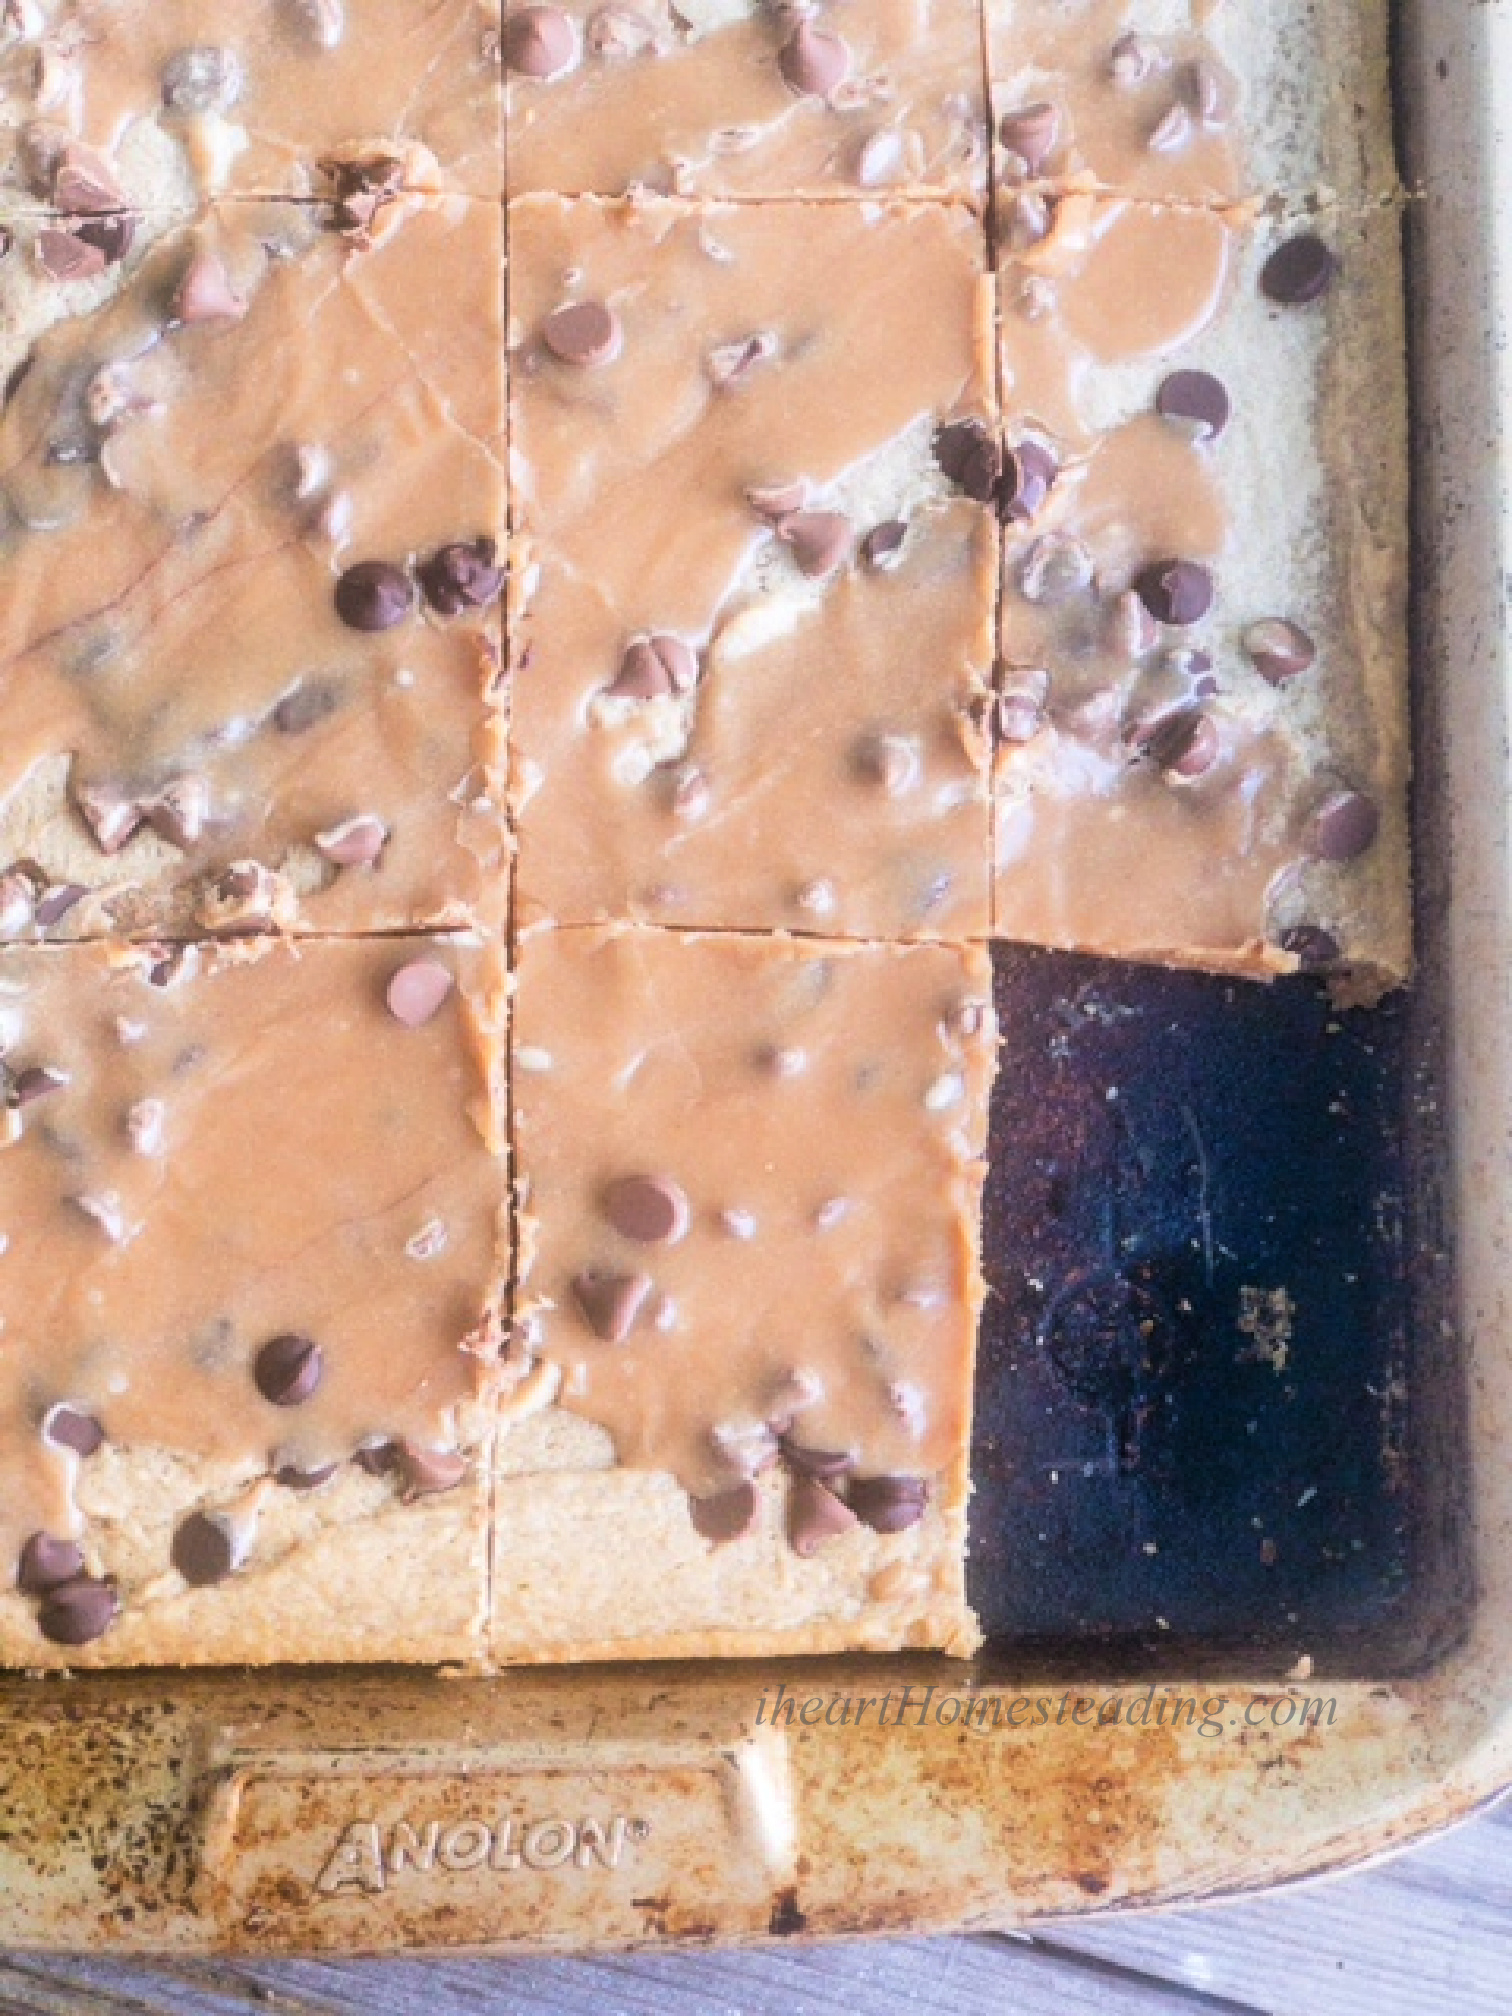 Easy to make chocolate chip peanut butter bars with PB glaze